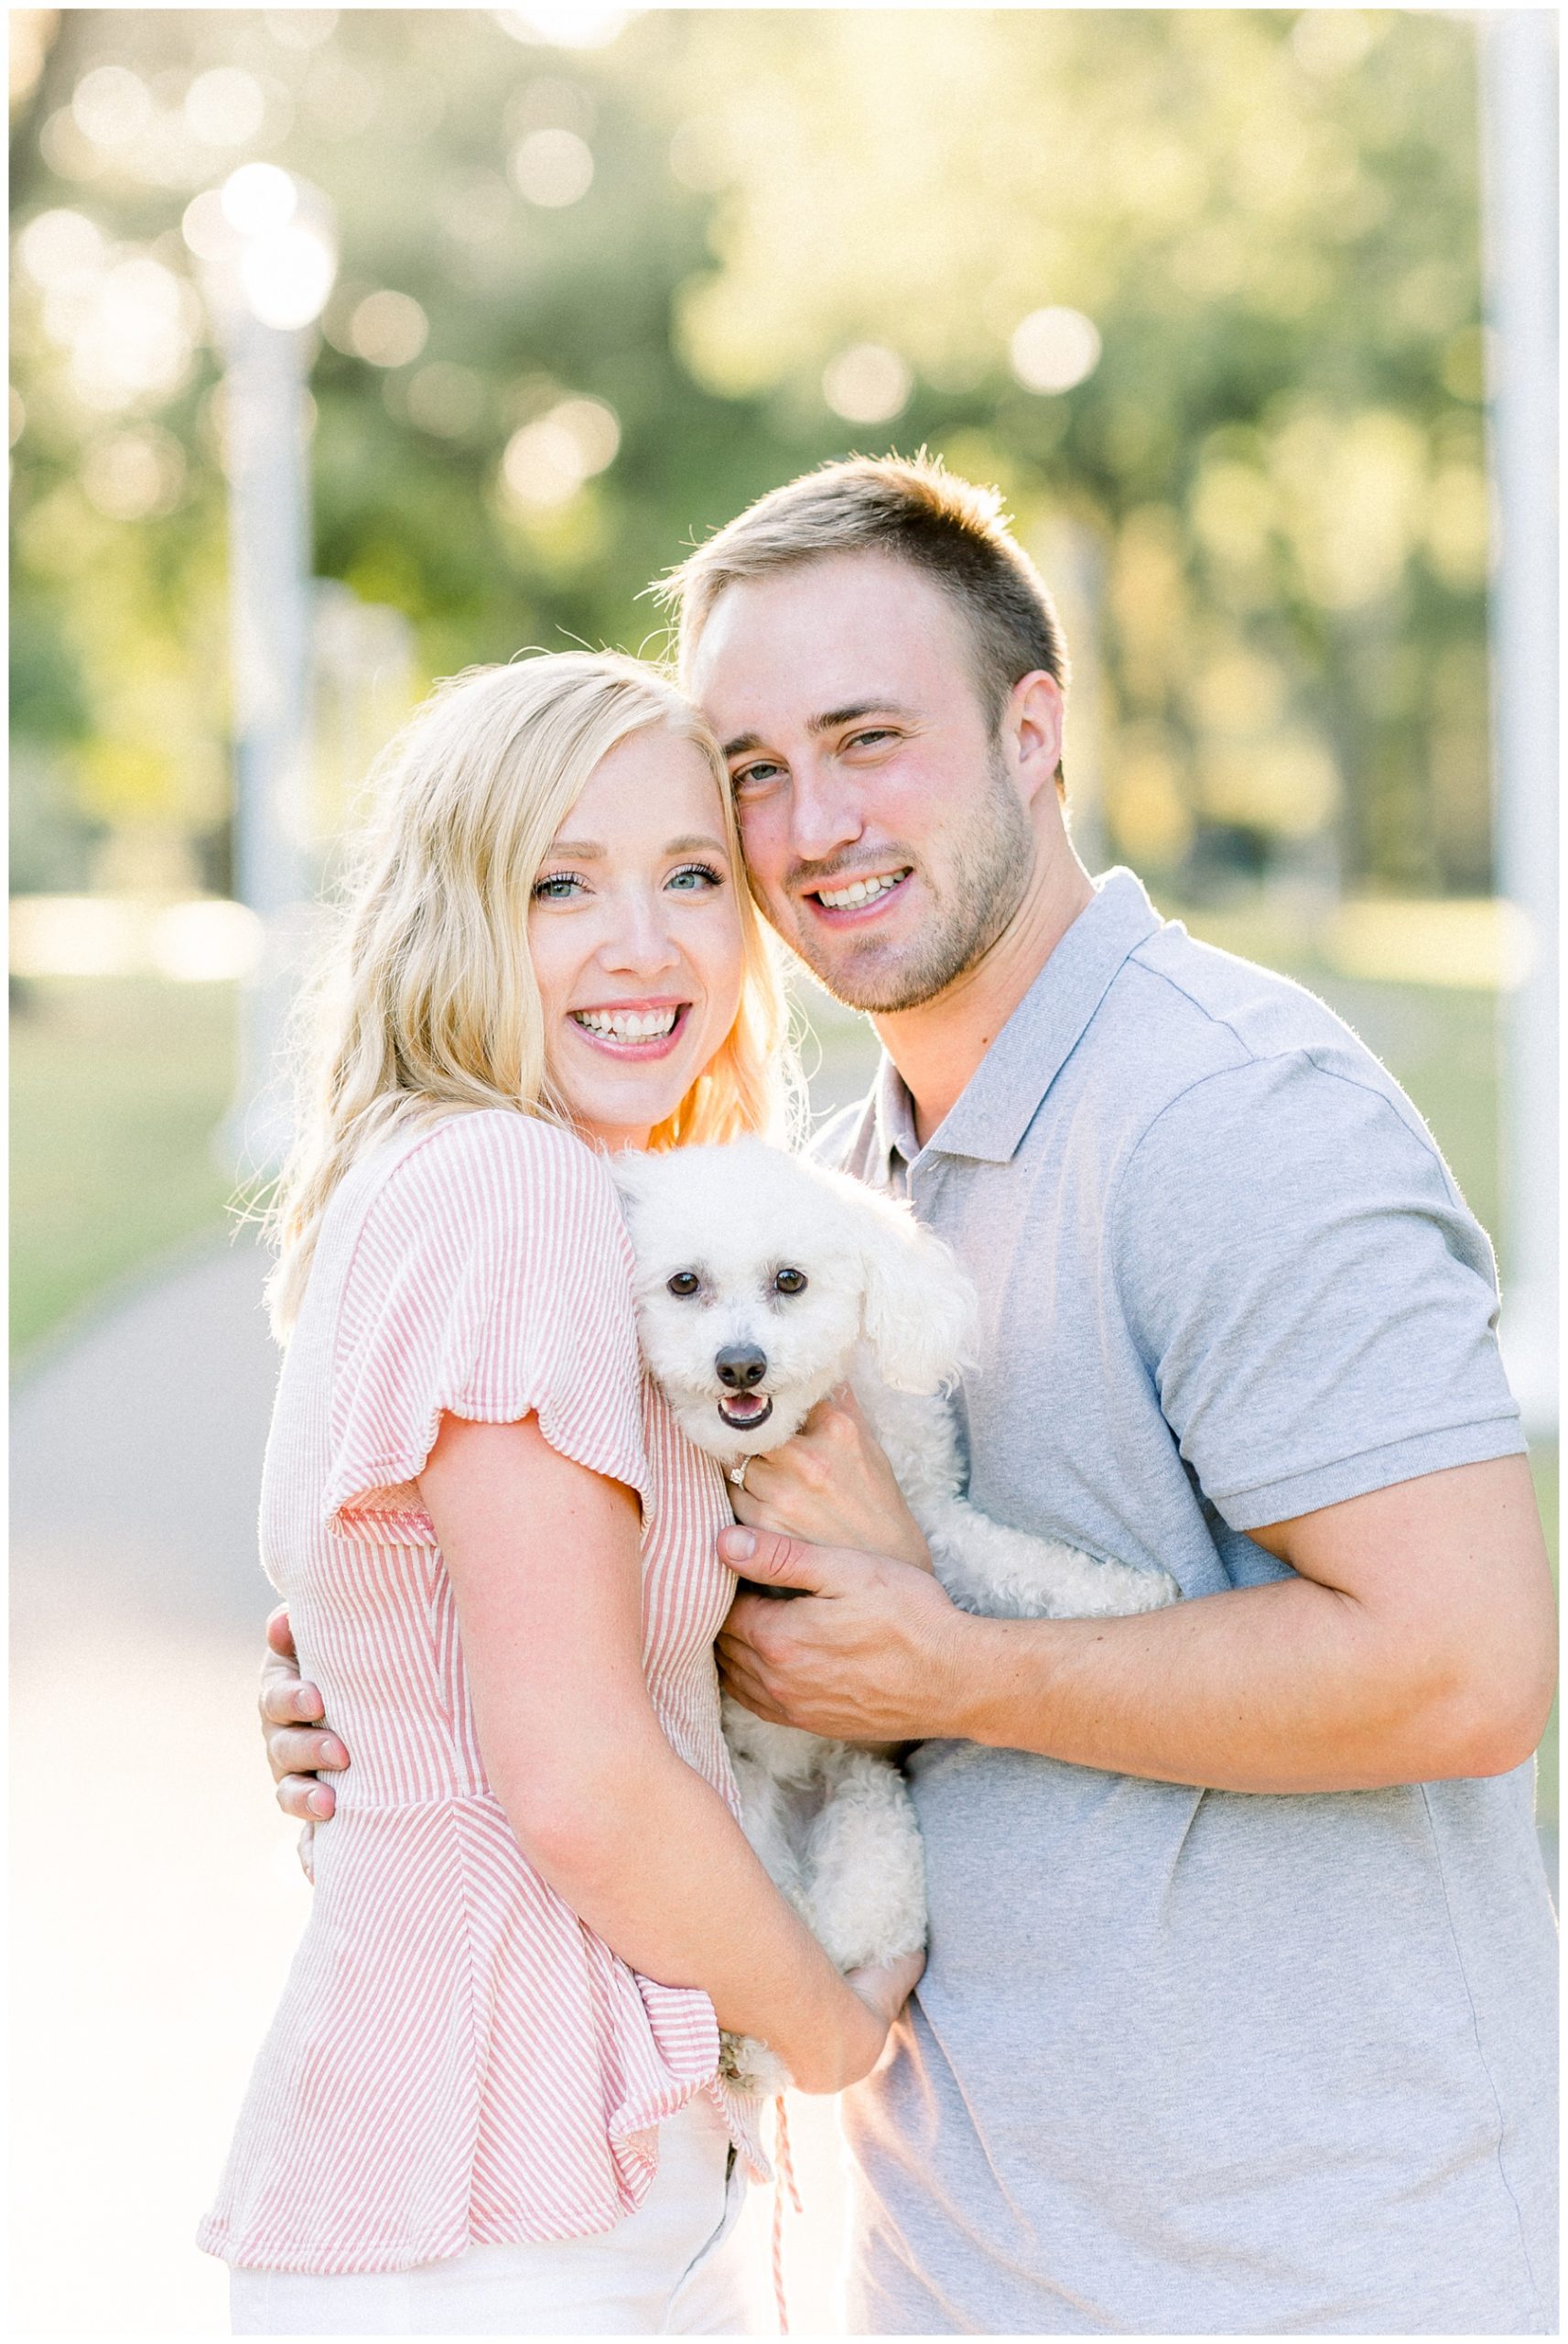 Edgewater Park Beach Engagement Session. Lake Erie Session in Cleveland Ohio with Puppy